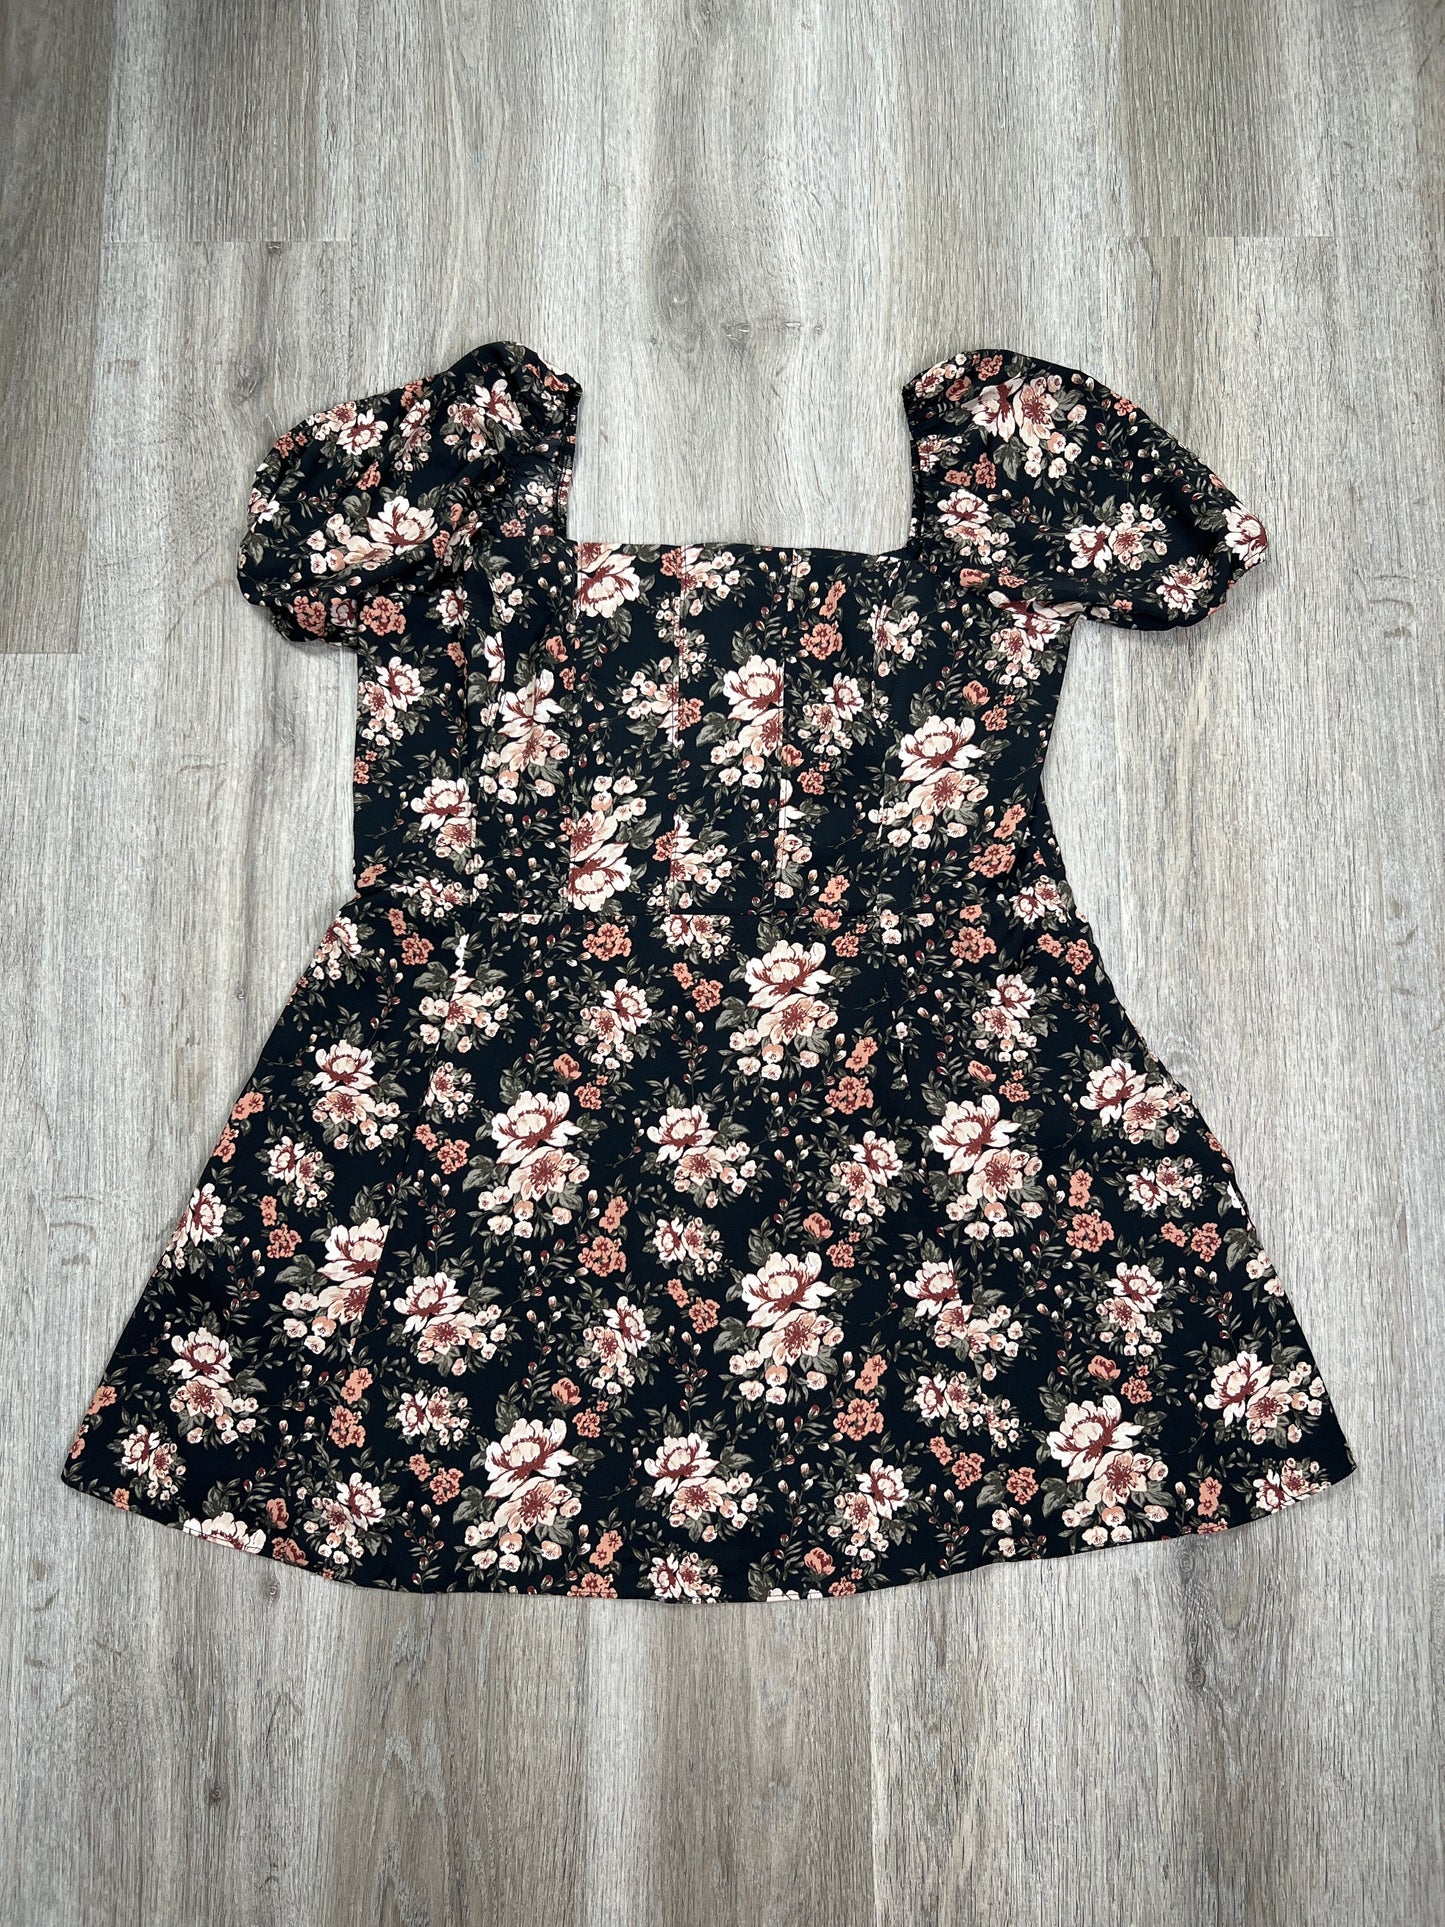 Floral Print Dress Casual Short Abercrombie And Fitch, Size Xl